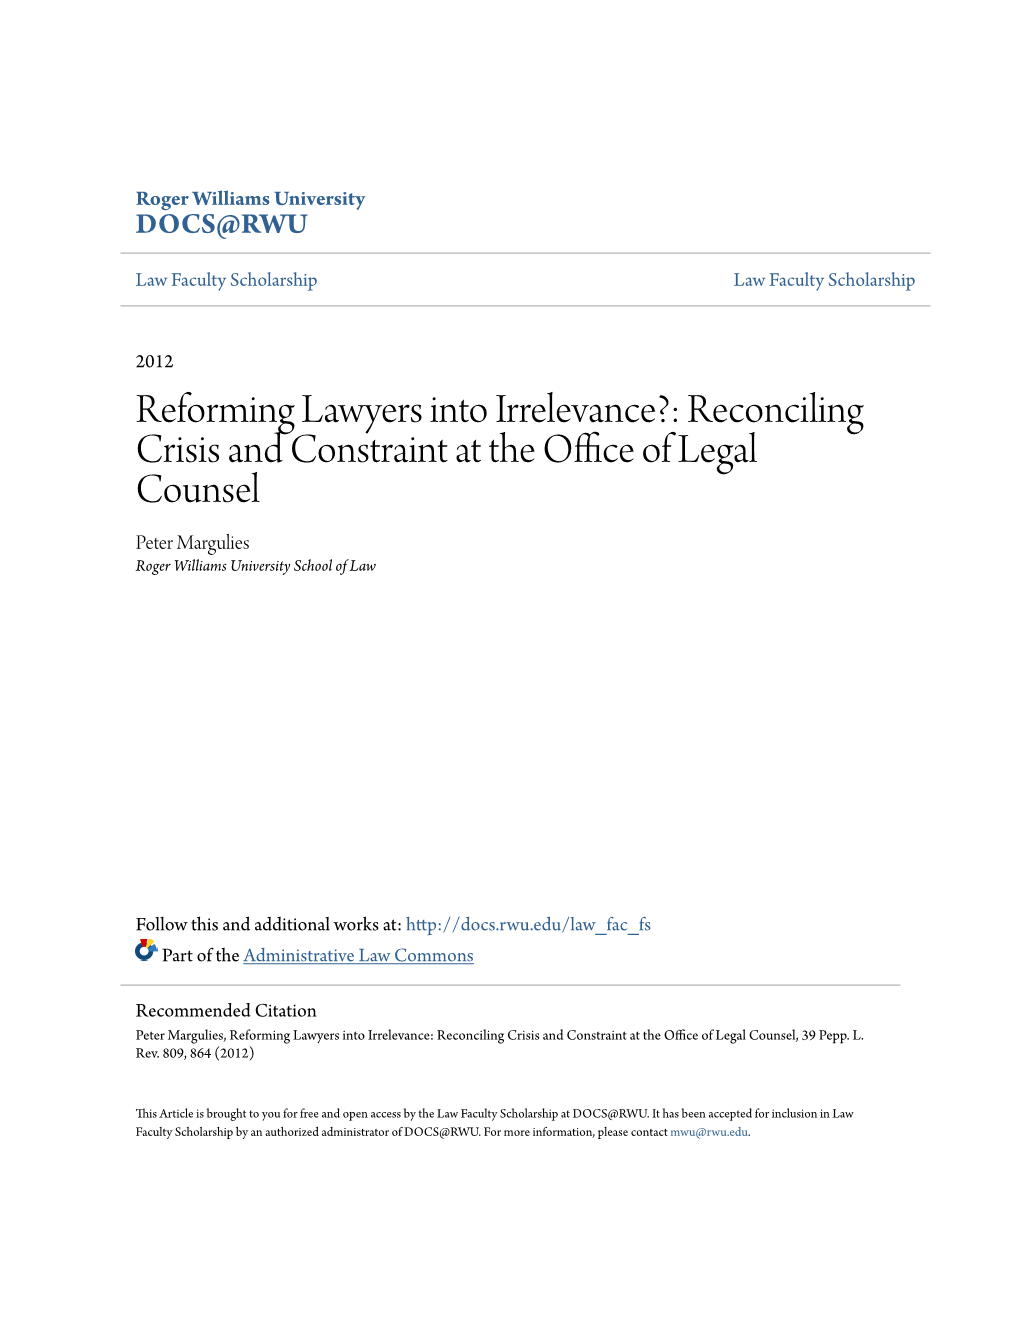 Reforming Lawyers Into Irrelevance?: Reconciling Crisis and Constraint at the Office of Legal Counsel Peter Margulies Roger Williams University School of Law